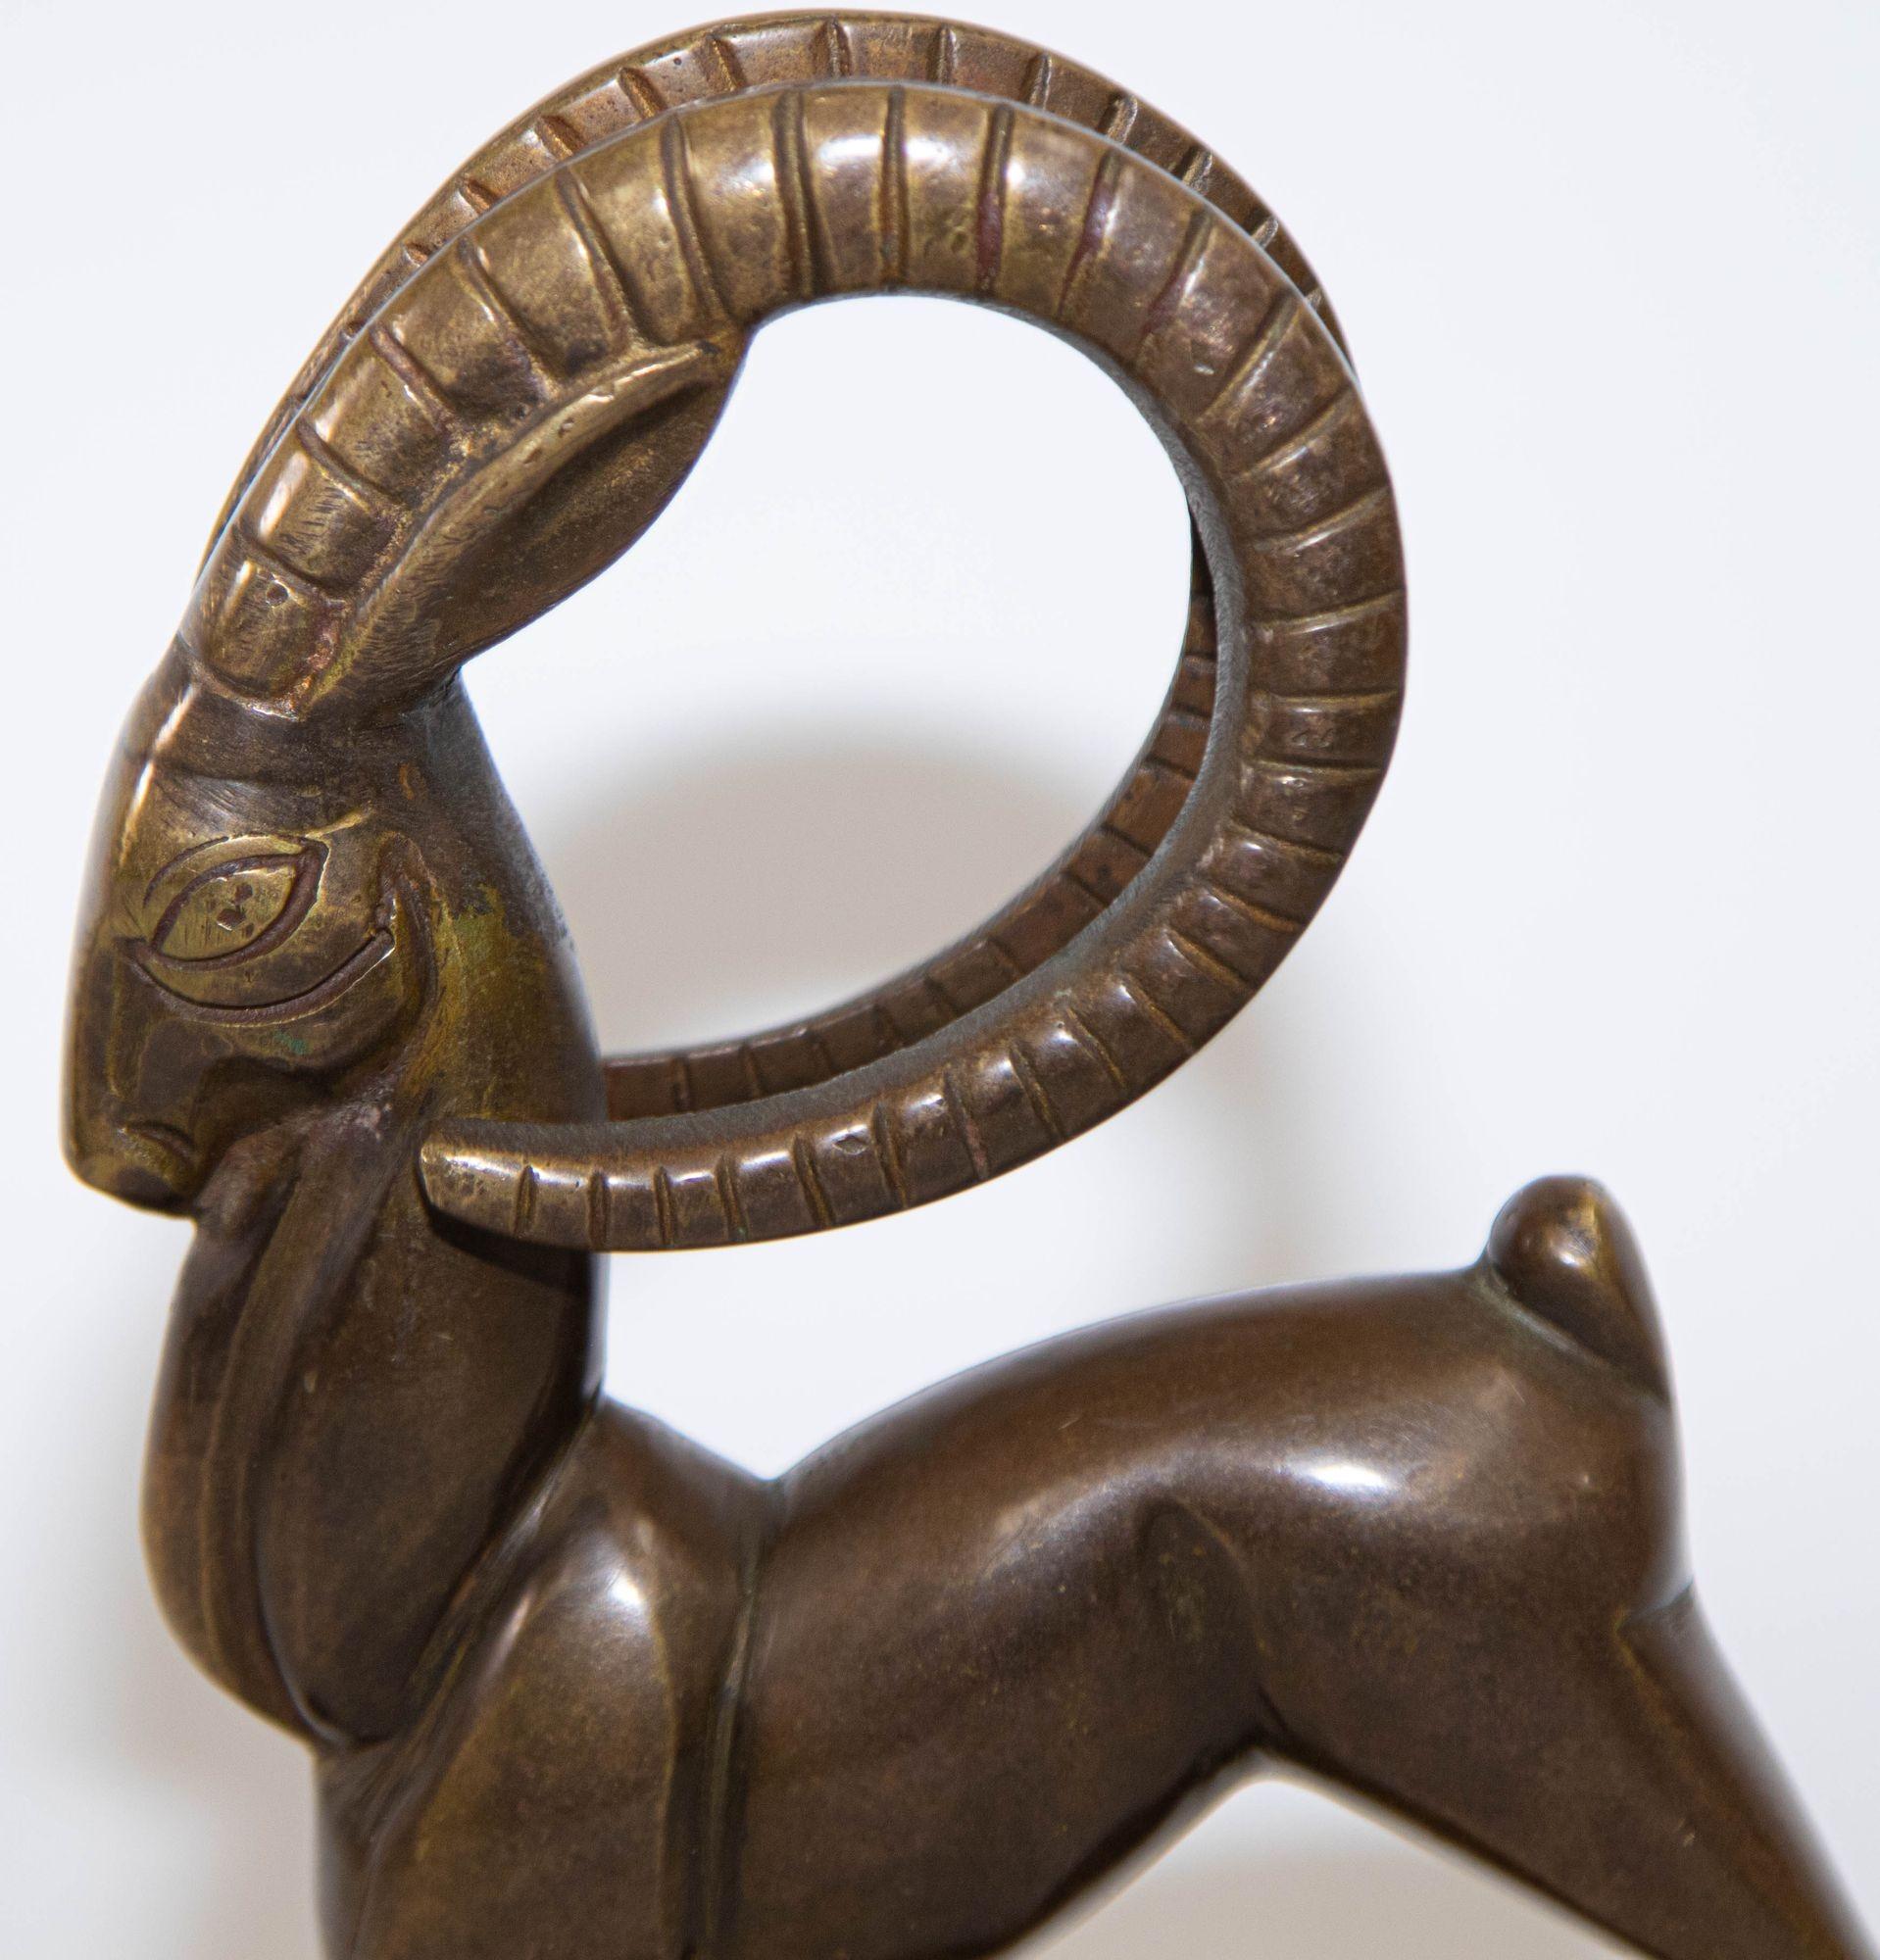 Vintage French Art Deco style brass metal animal sculpture of a ibex gazelle
Beautiful elegant art Deco style cast brass ram, gazelle antelope sculpture mounted on a brass base plate.
antelopes are a symbol of speed, grace wild beauty is captured